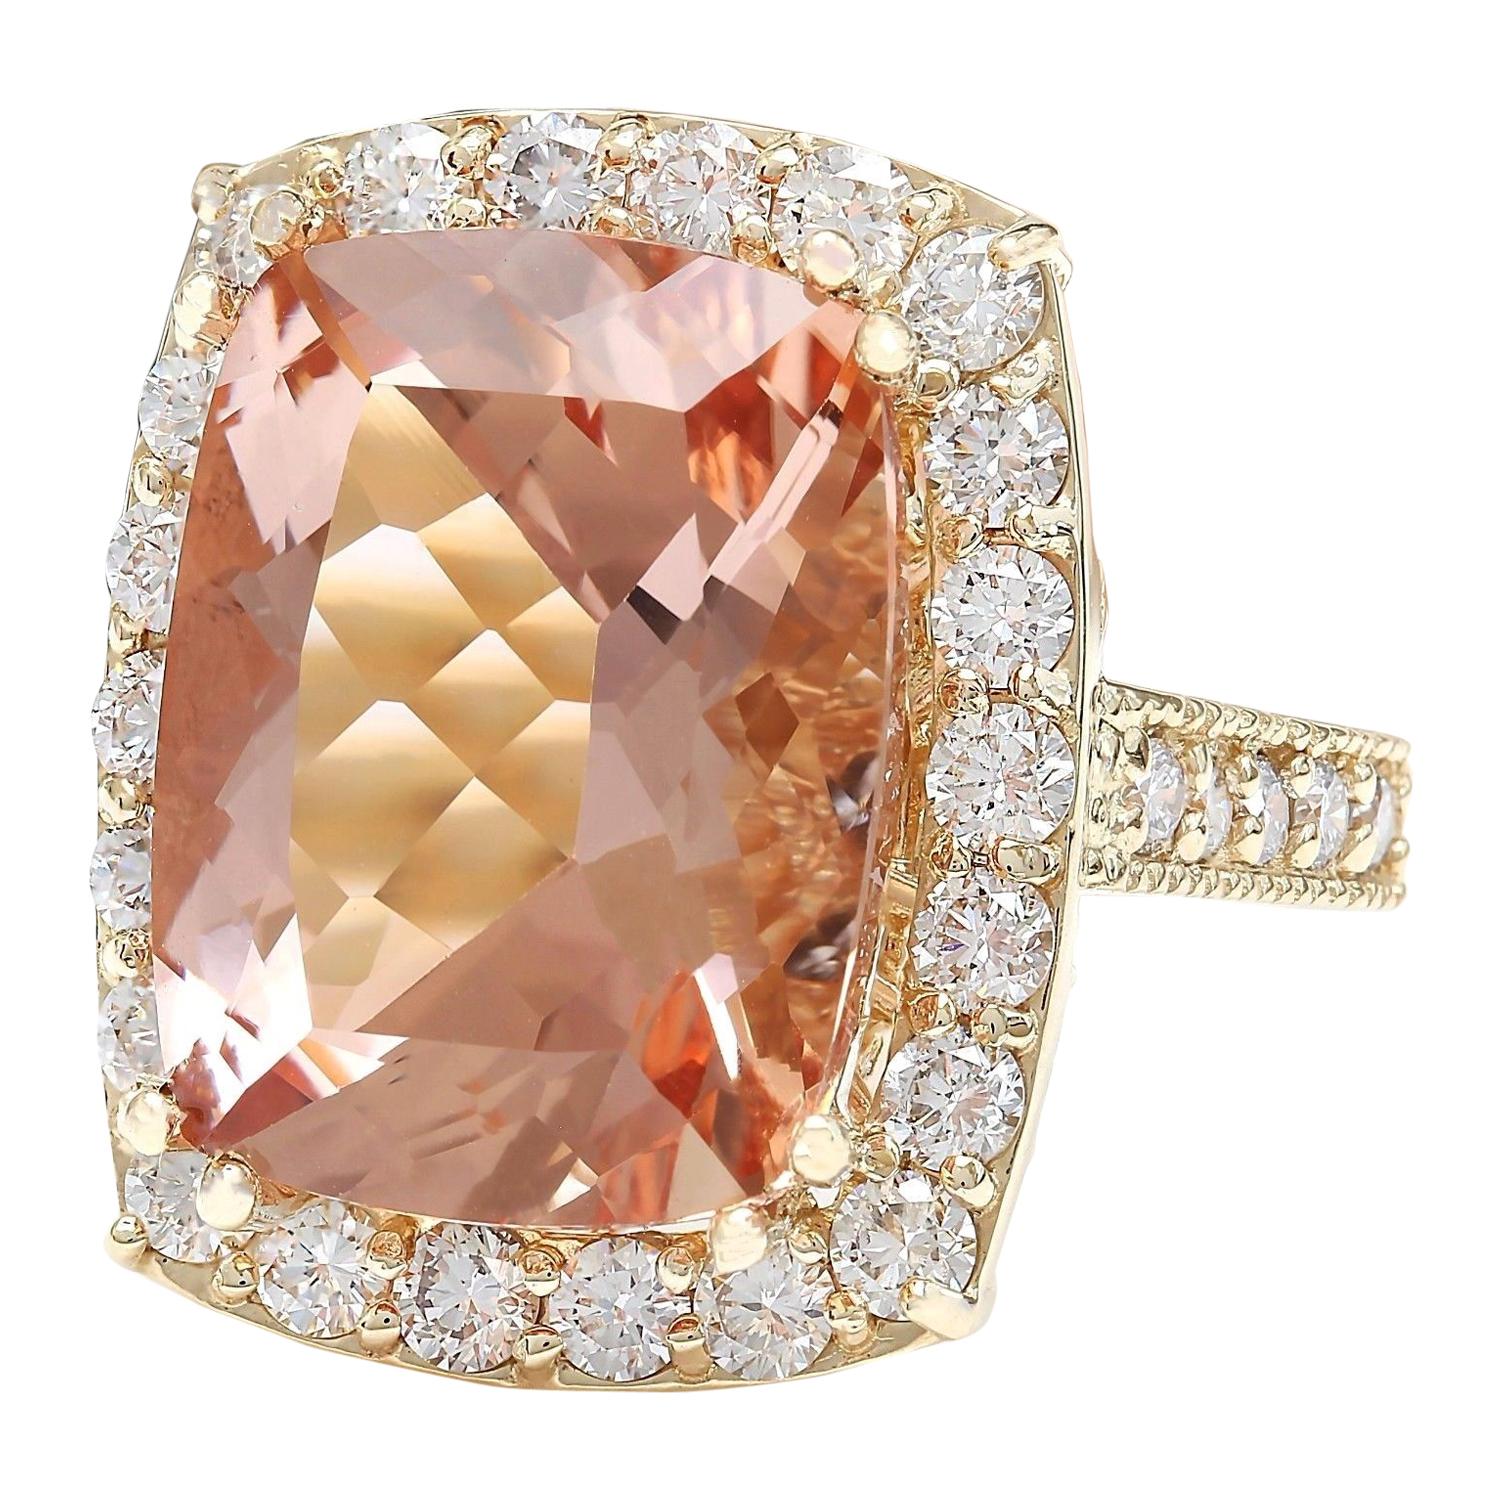 Introducing our exquisite 12.52 Carat Natural Morganite 14K Solid Yellow Gold Diamond Ring, a true testament to sophistication and grace. Crafted from 14K Yellow Gold, this ring exudes elegance and luxury.
At the center of attention is a magnificent